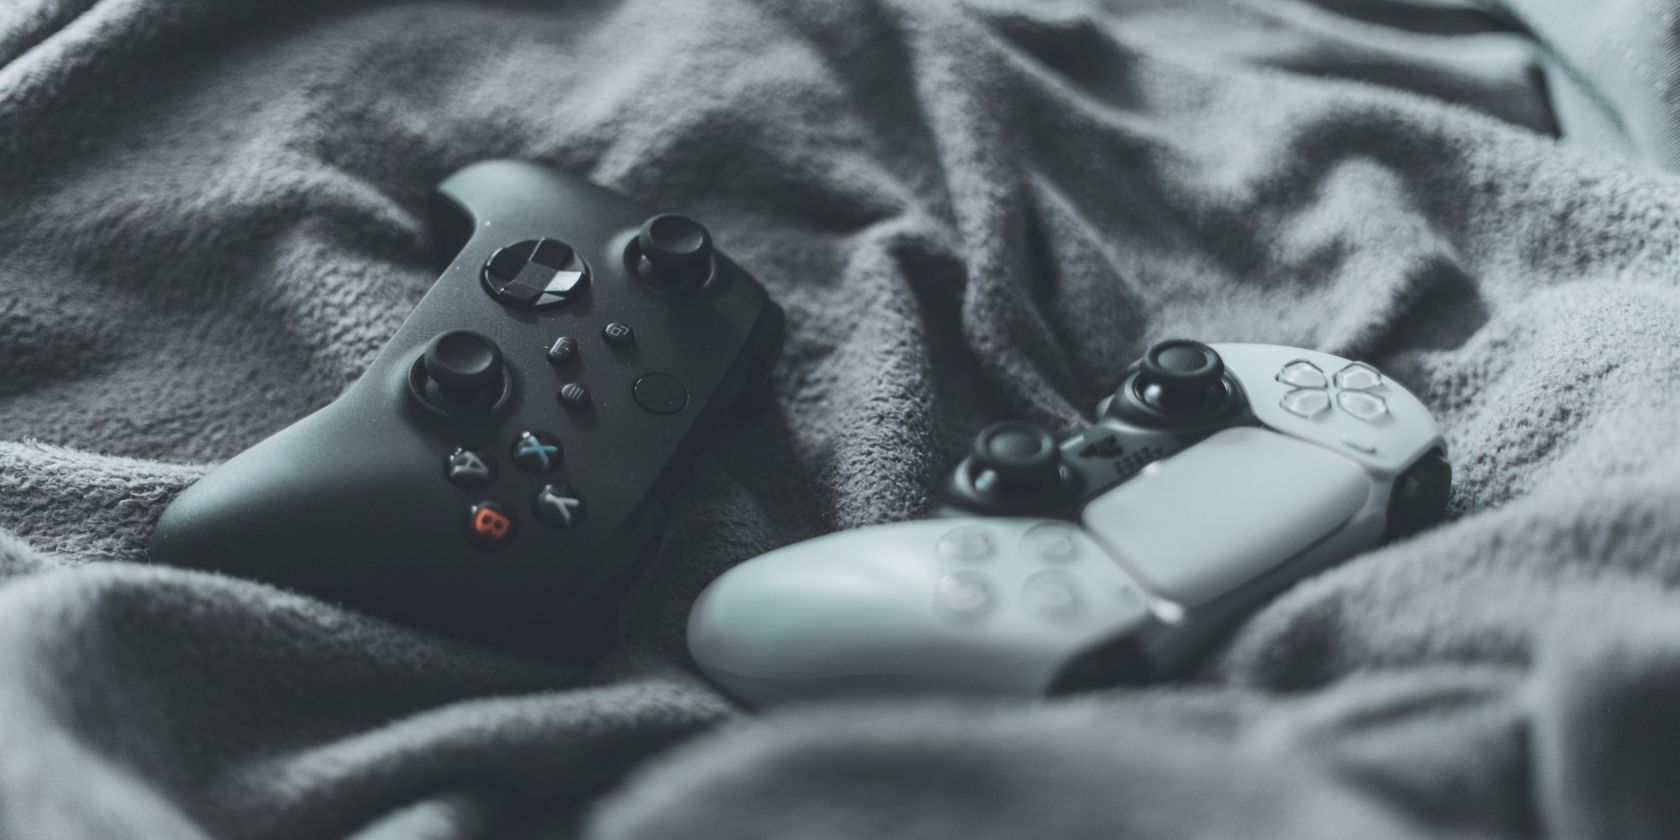 A photograph of a black Xbox Series X controller next to a standard PlayStation 5 controller 